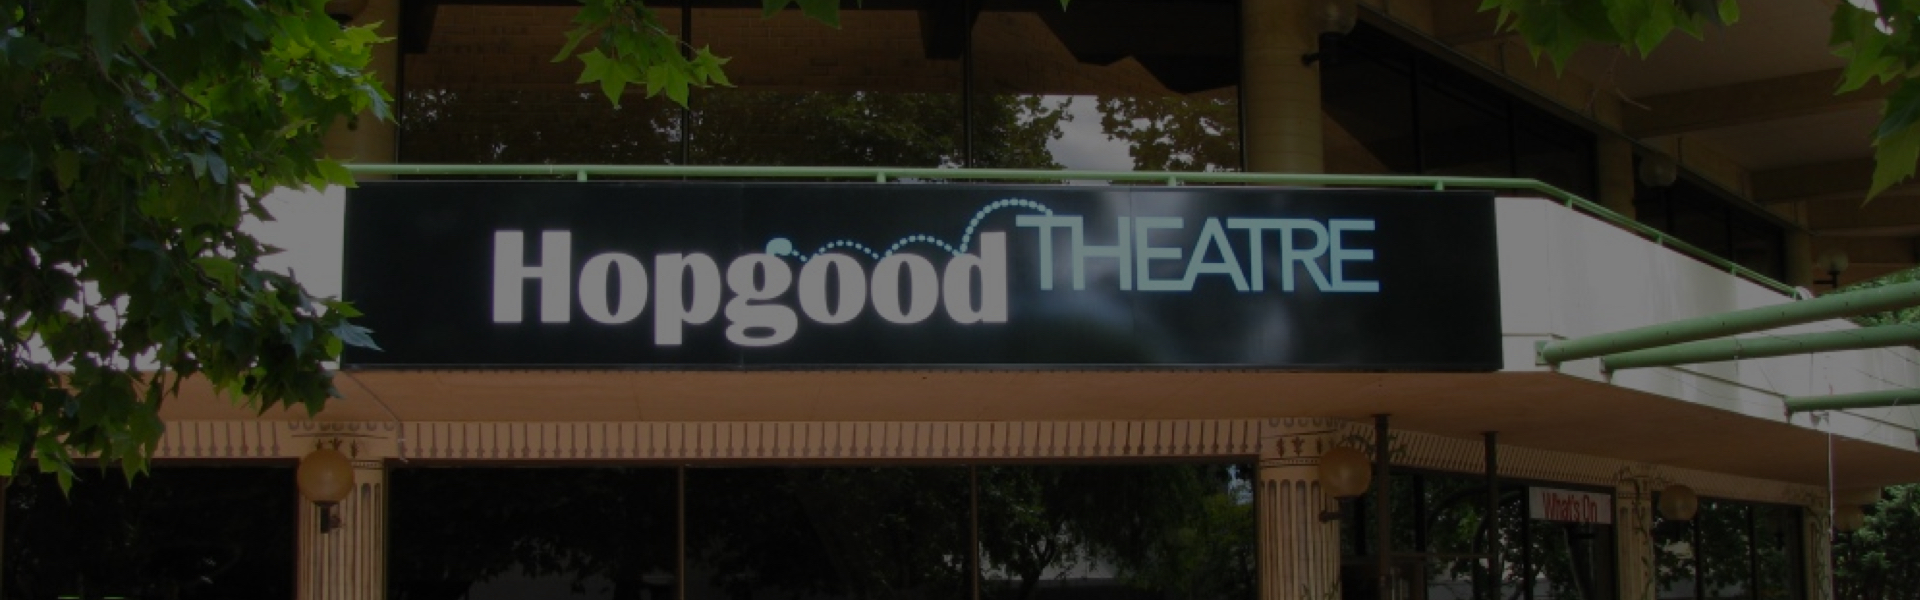 The sign on the front of the Hopgood Theatre, styled to look as though the word Theatre has hopped over the word Hopgood